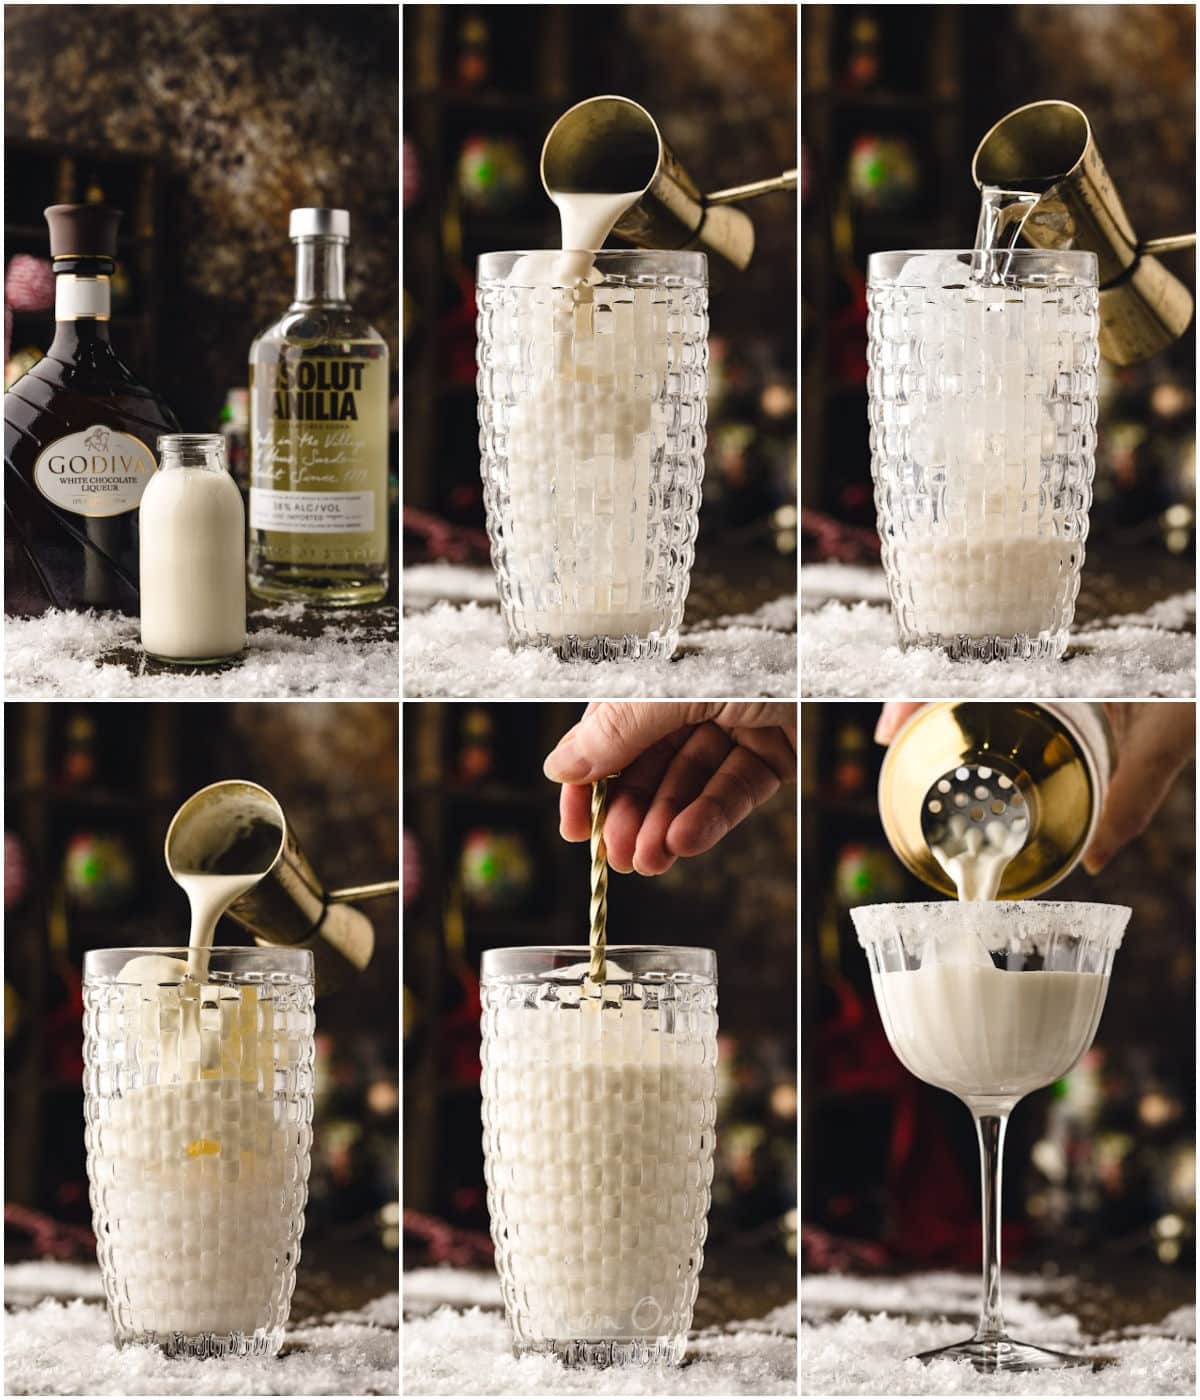 six image collage showing how to make a white chocolate martini.